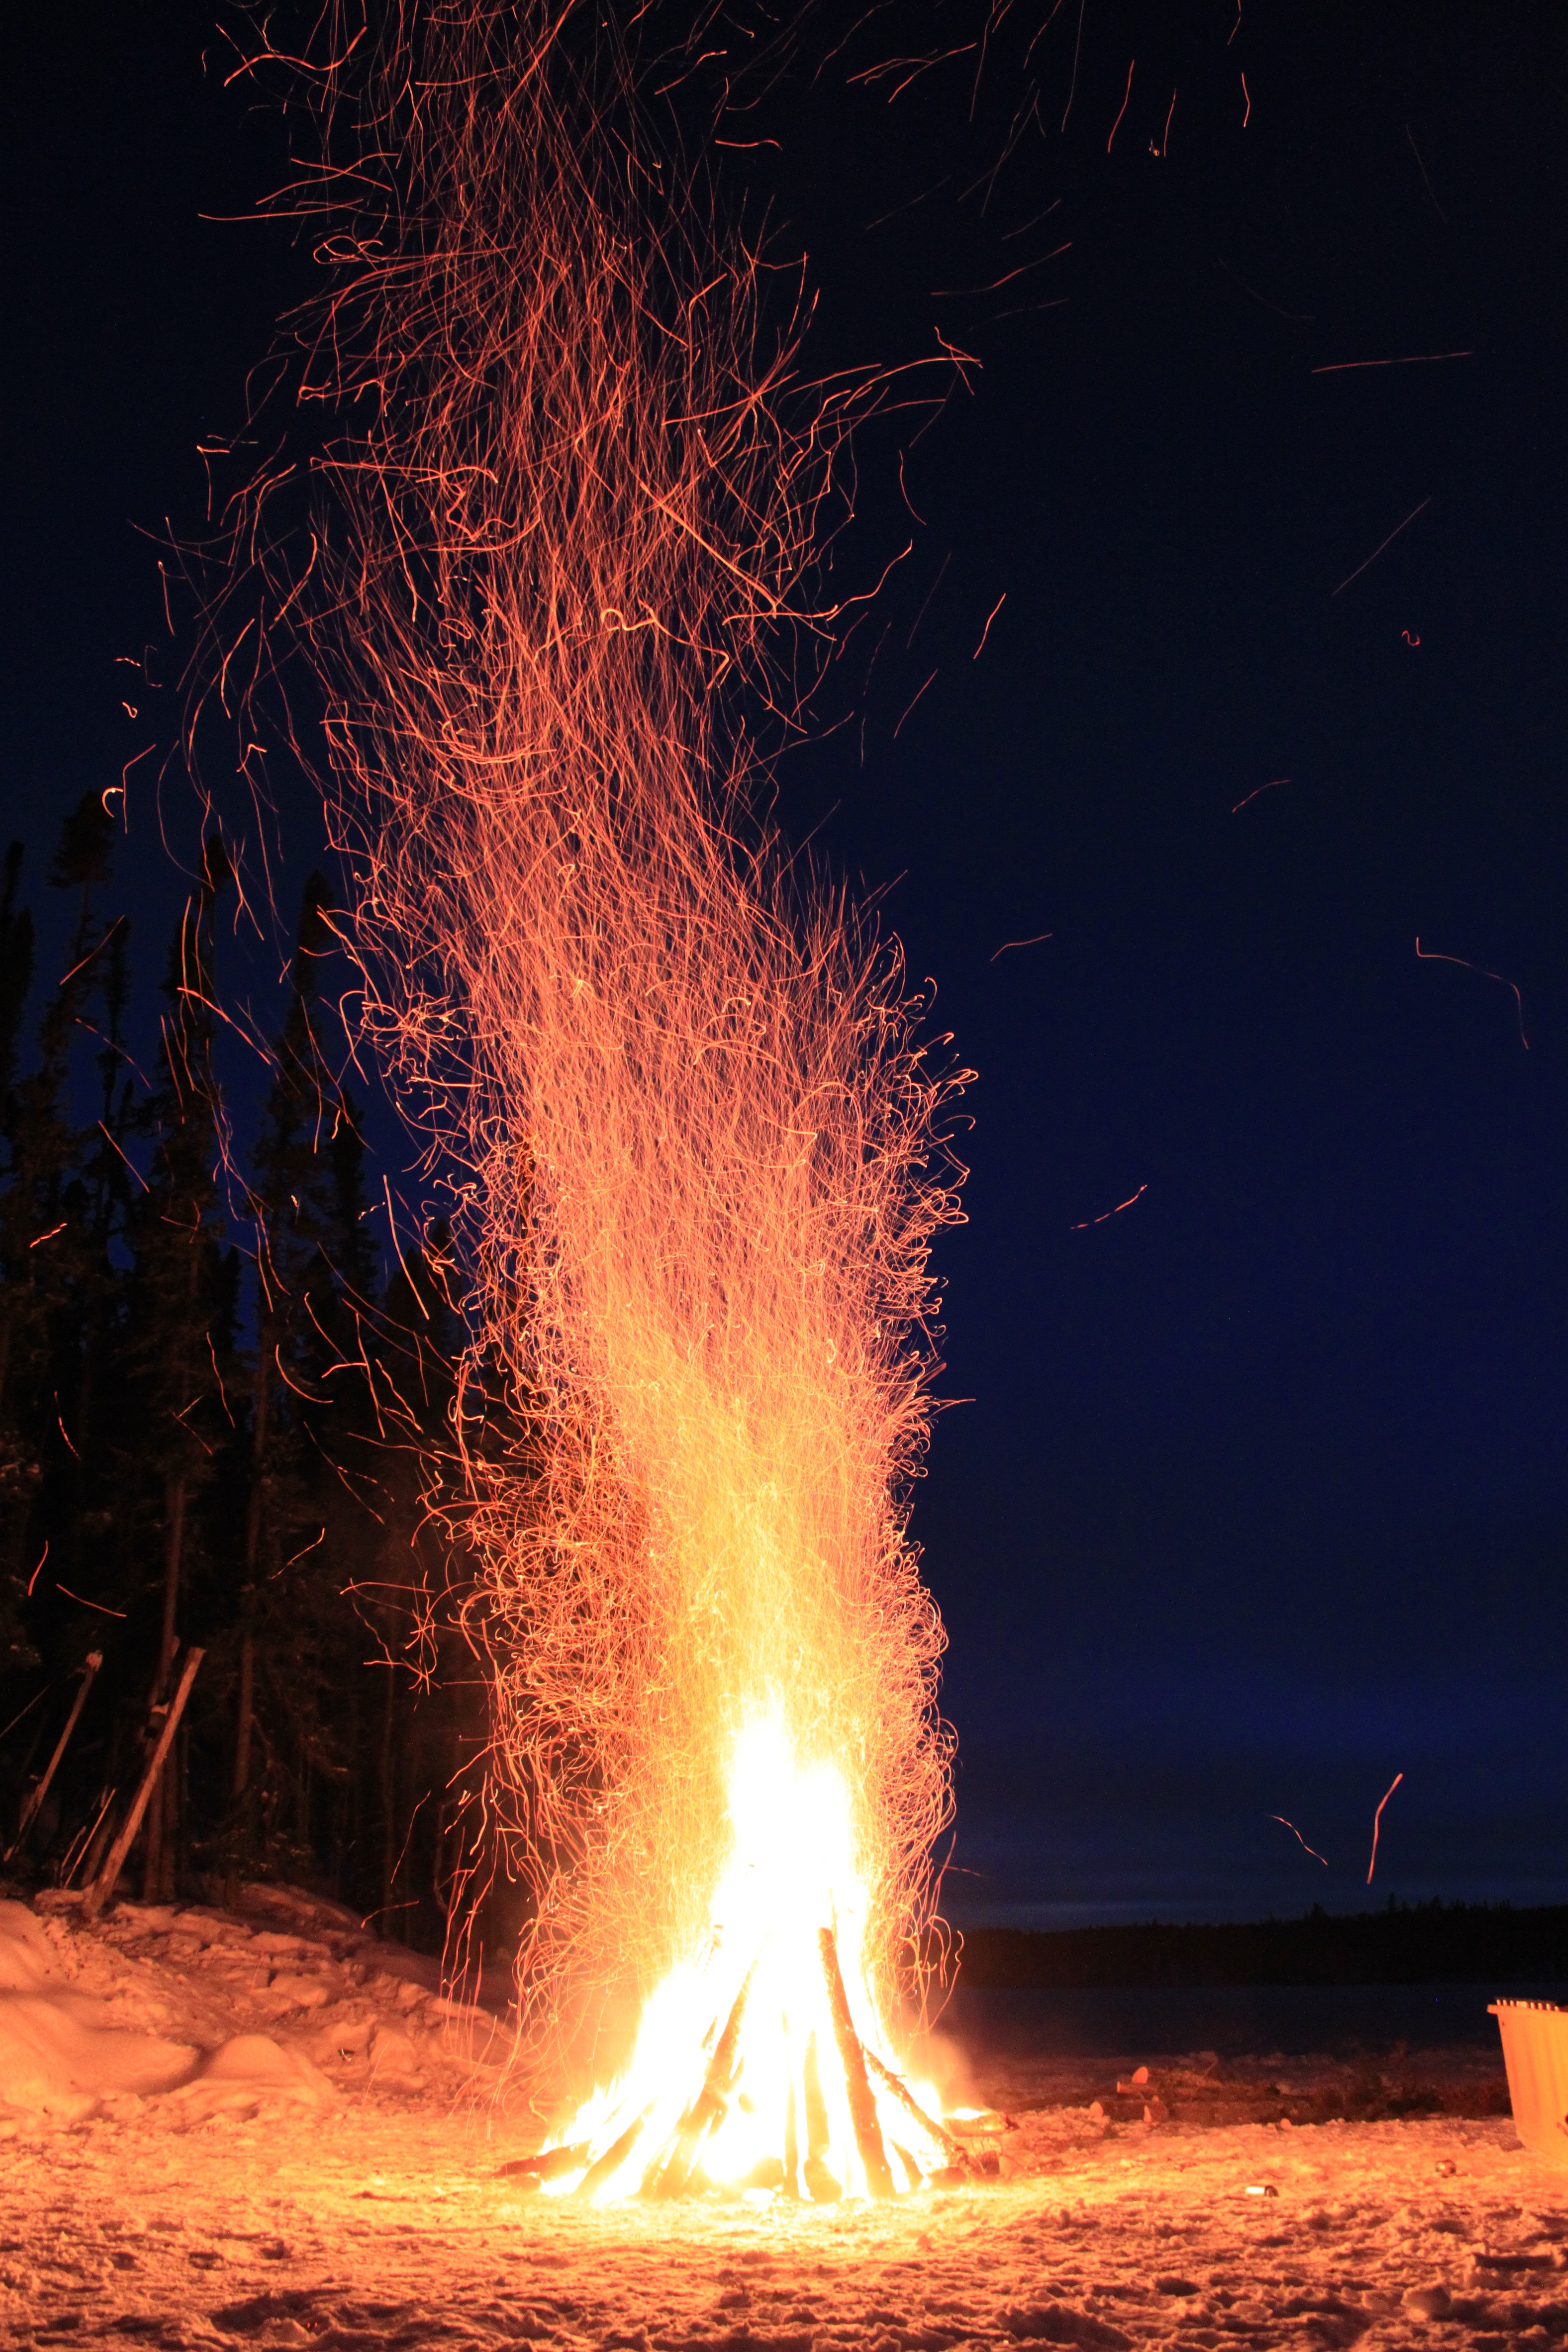 Free Image, winter, night, sparkler, flame, fire, campfire, bonfire, hot, warmth 3168x4752